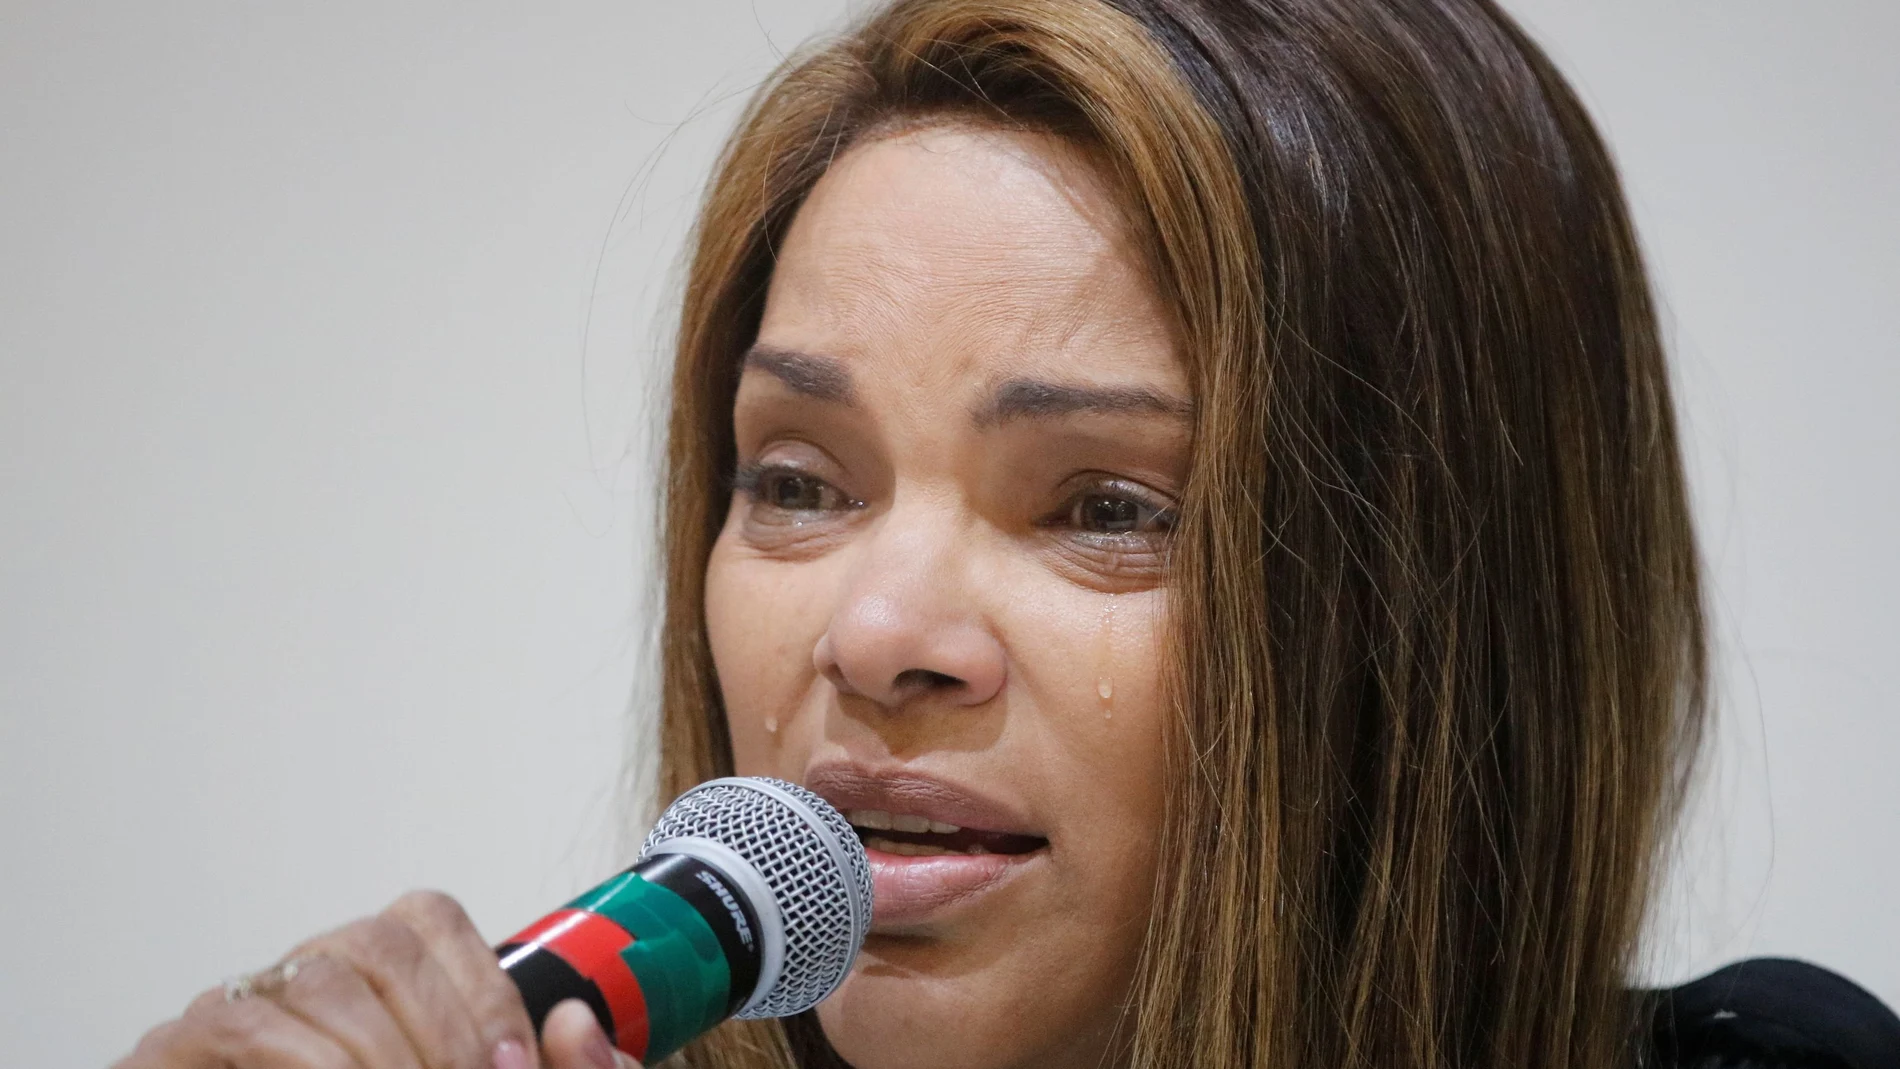 Brazilian Congresswoman Flordelis de Souza reacts as she talks about her husband, pastor Anderson do Carmo, who was shot more than 30 times at their home, in Brasilia